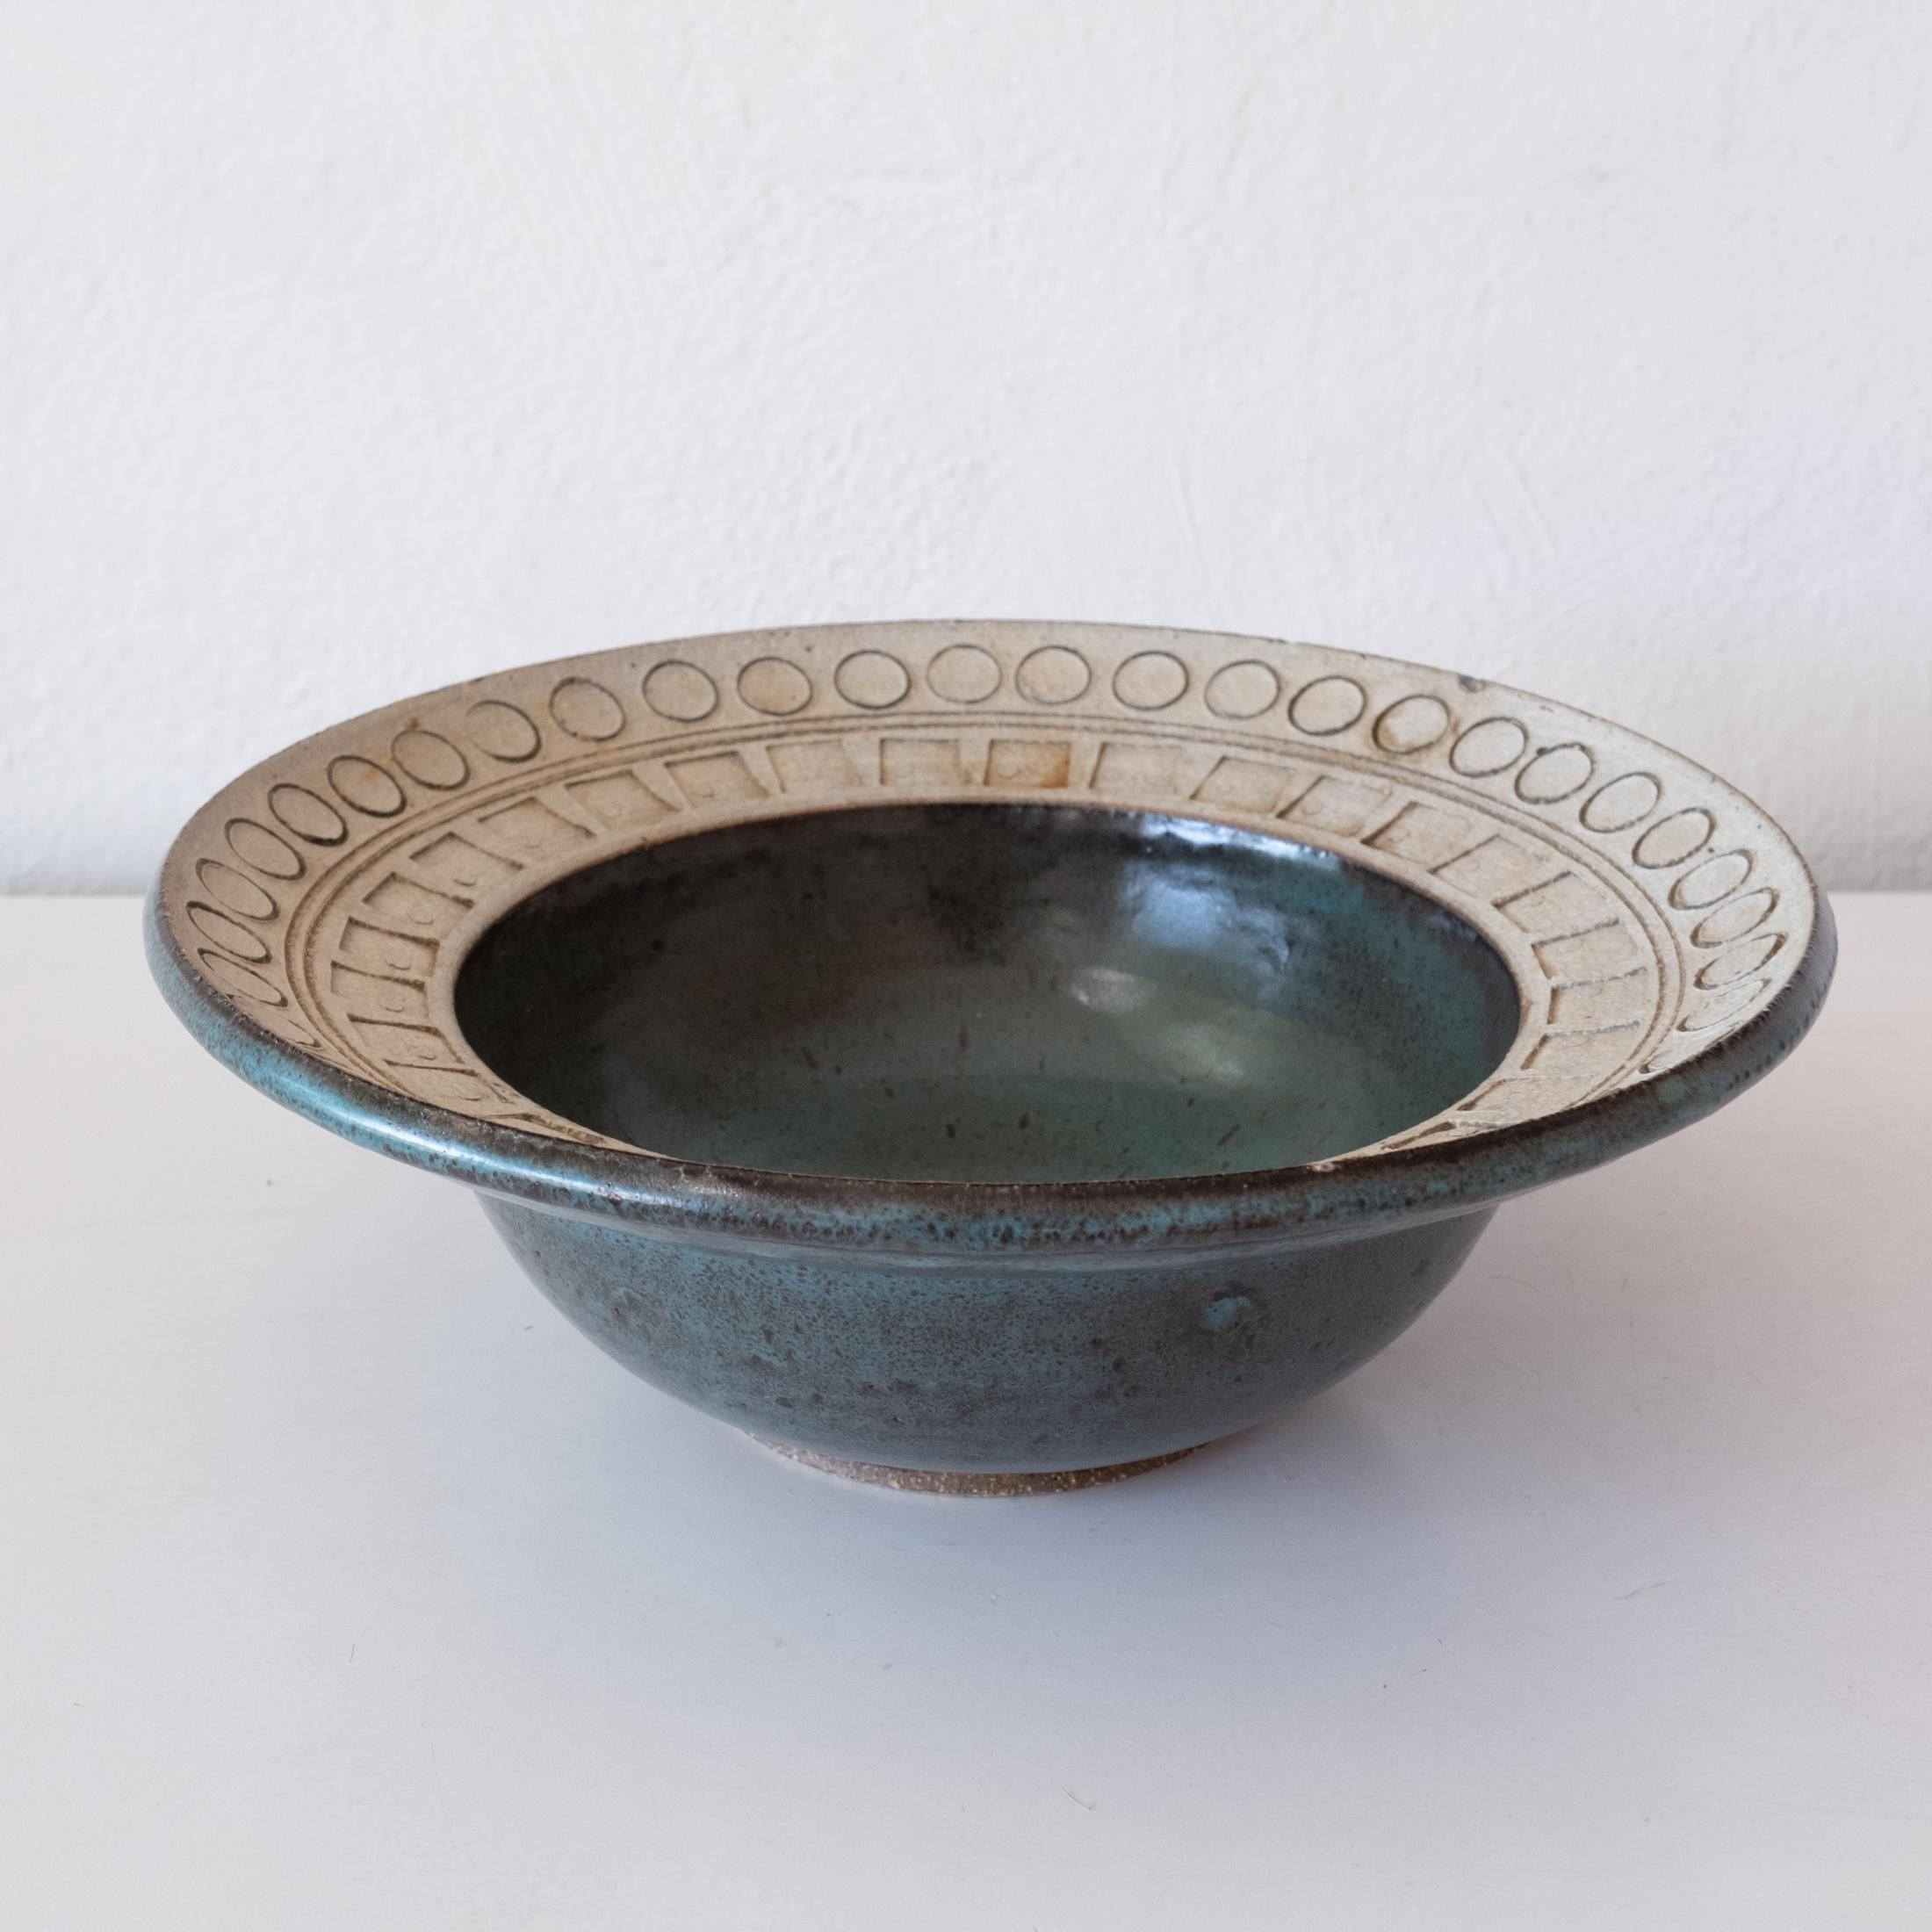 Stoneware bowl with incised geometric decoration by California artist, Joel Edwards. 1960s

Joel Edwards. Los Angeles, CA. Studied at Otis Art Institute under Peter Voulkos. Creator of “Creative Crafts” Magazine, 1960-1964.

6.5 inches wide x 3